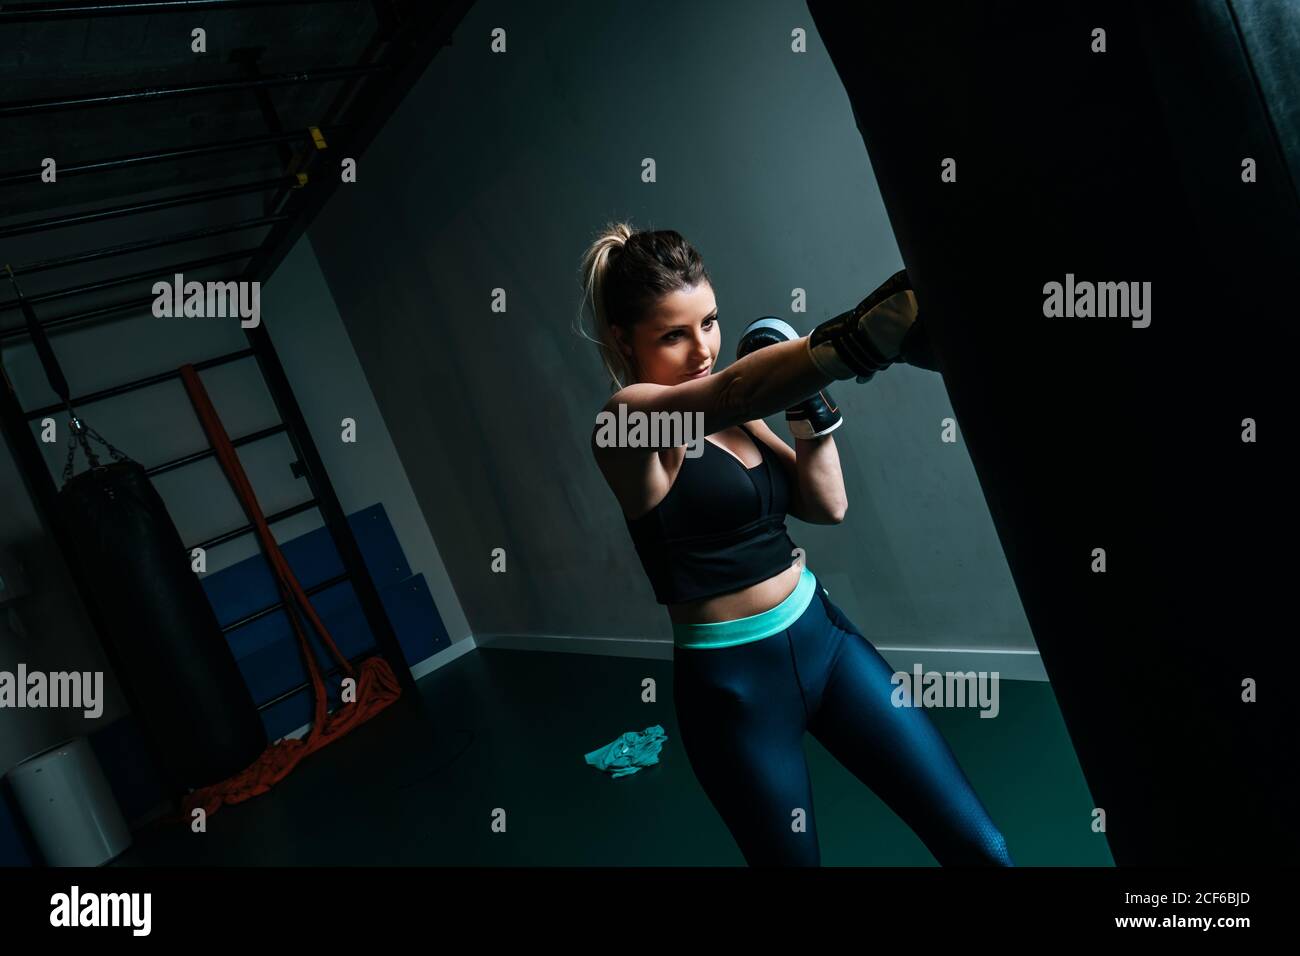 Woman training in gym with punching bag Stock Photo